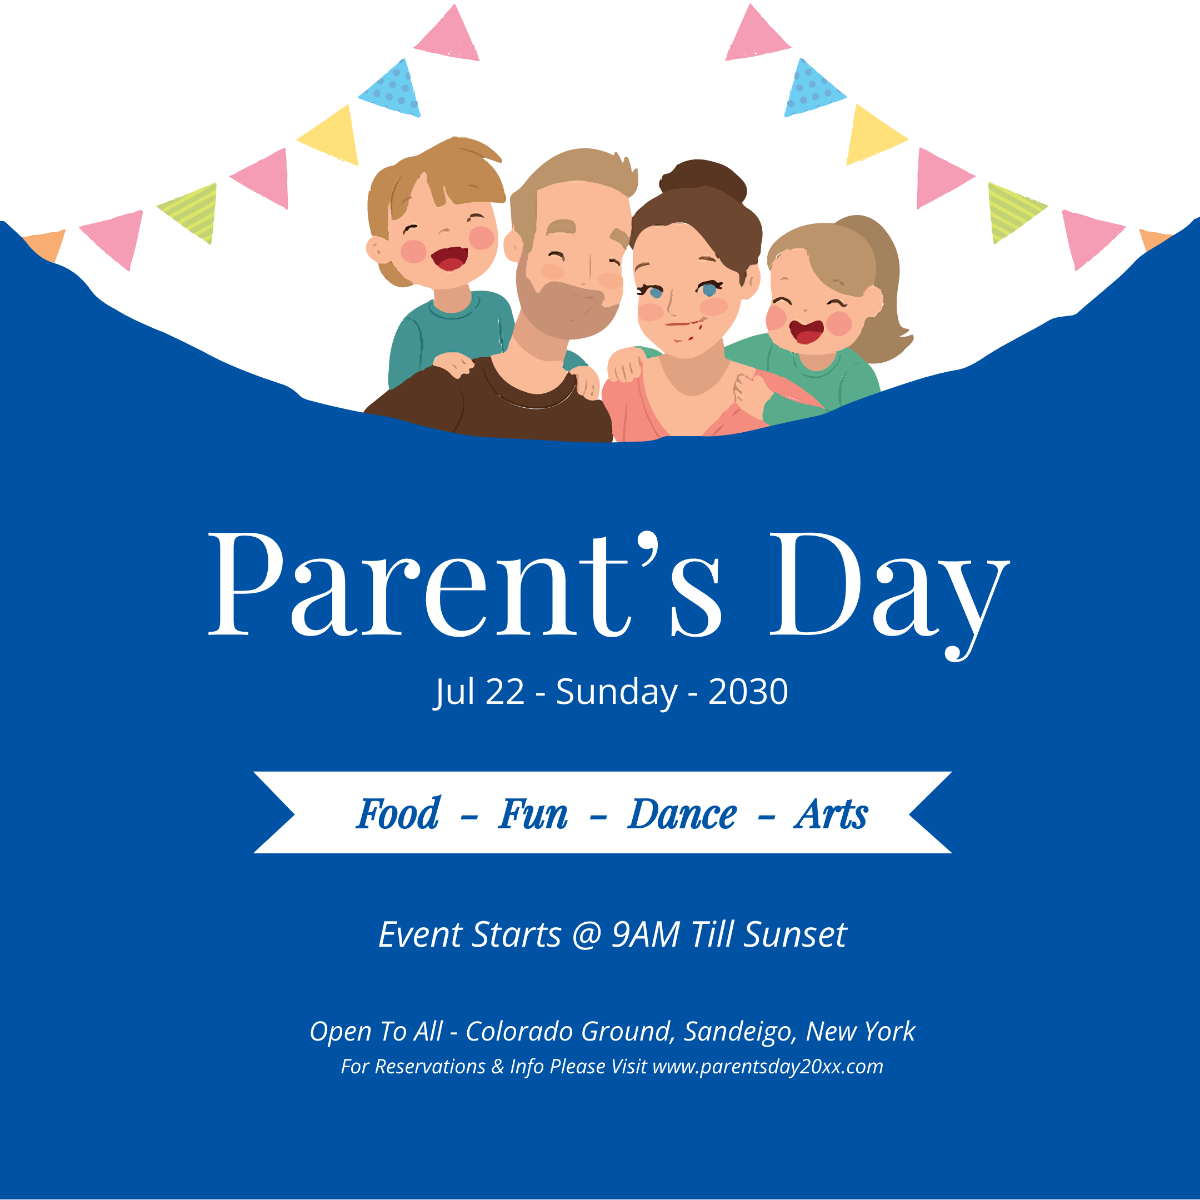 Free Parent's Day Instagram Post Template